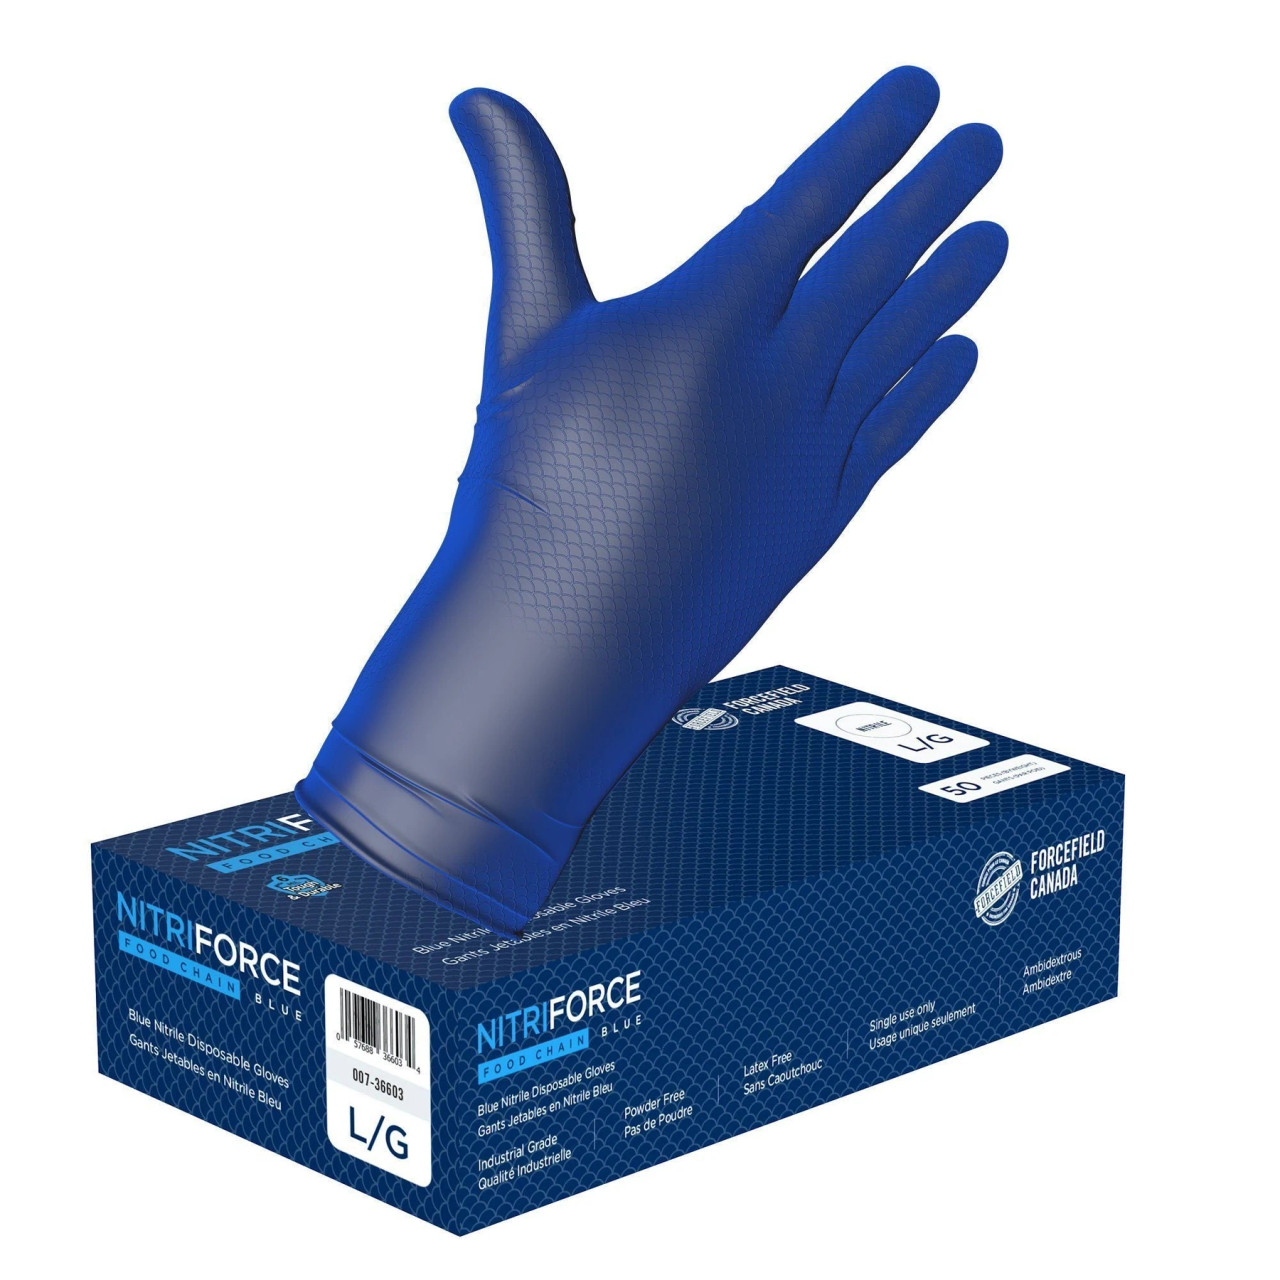 NitriForce 007-36605 Foodchain Textured Nitrile Disposable Gloves 2XLarge (Case of 500 Gloves)